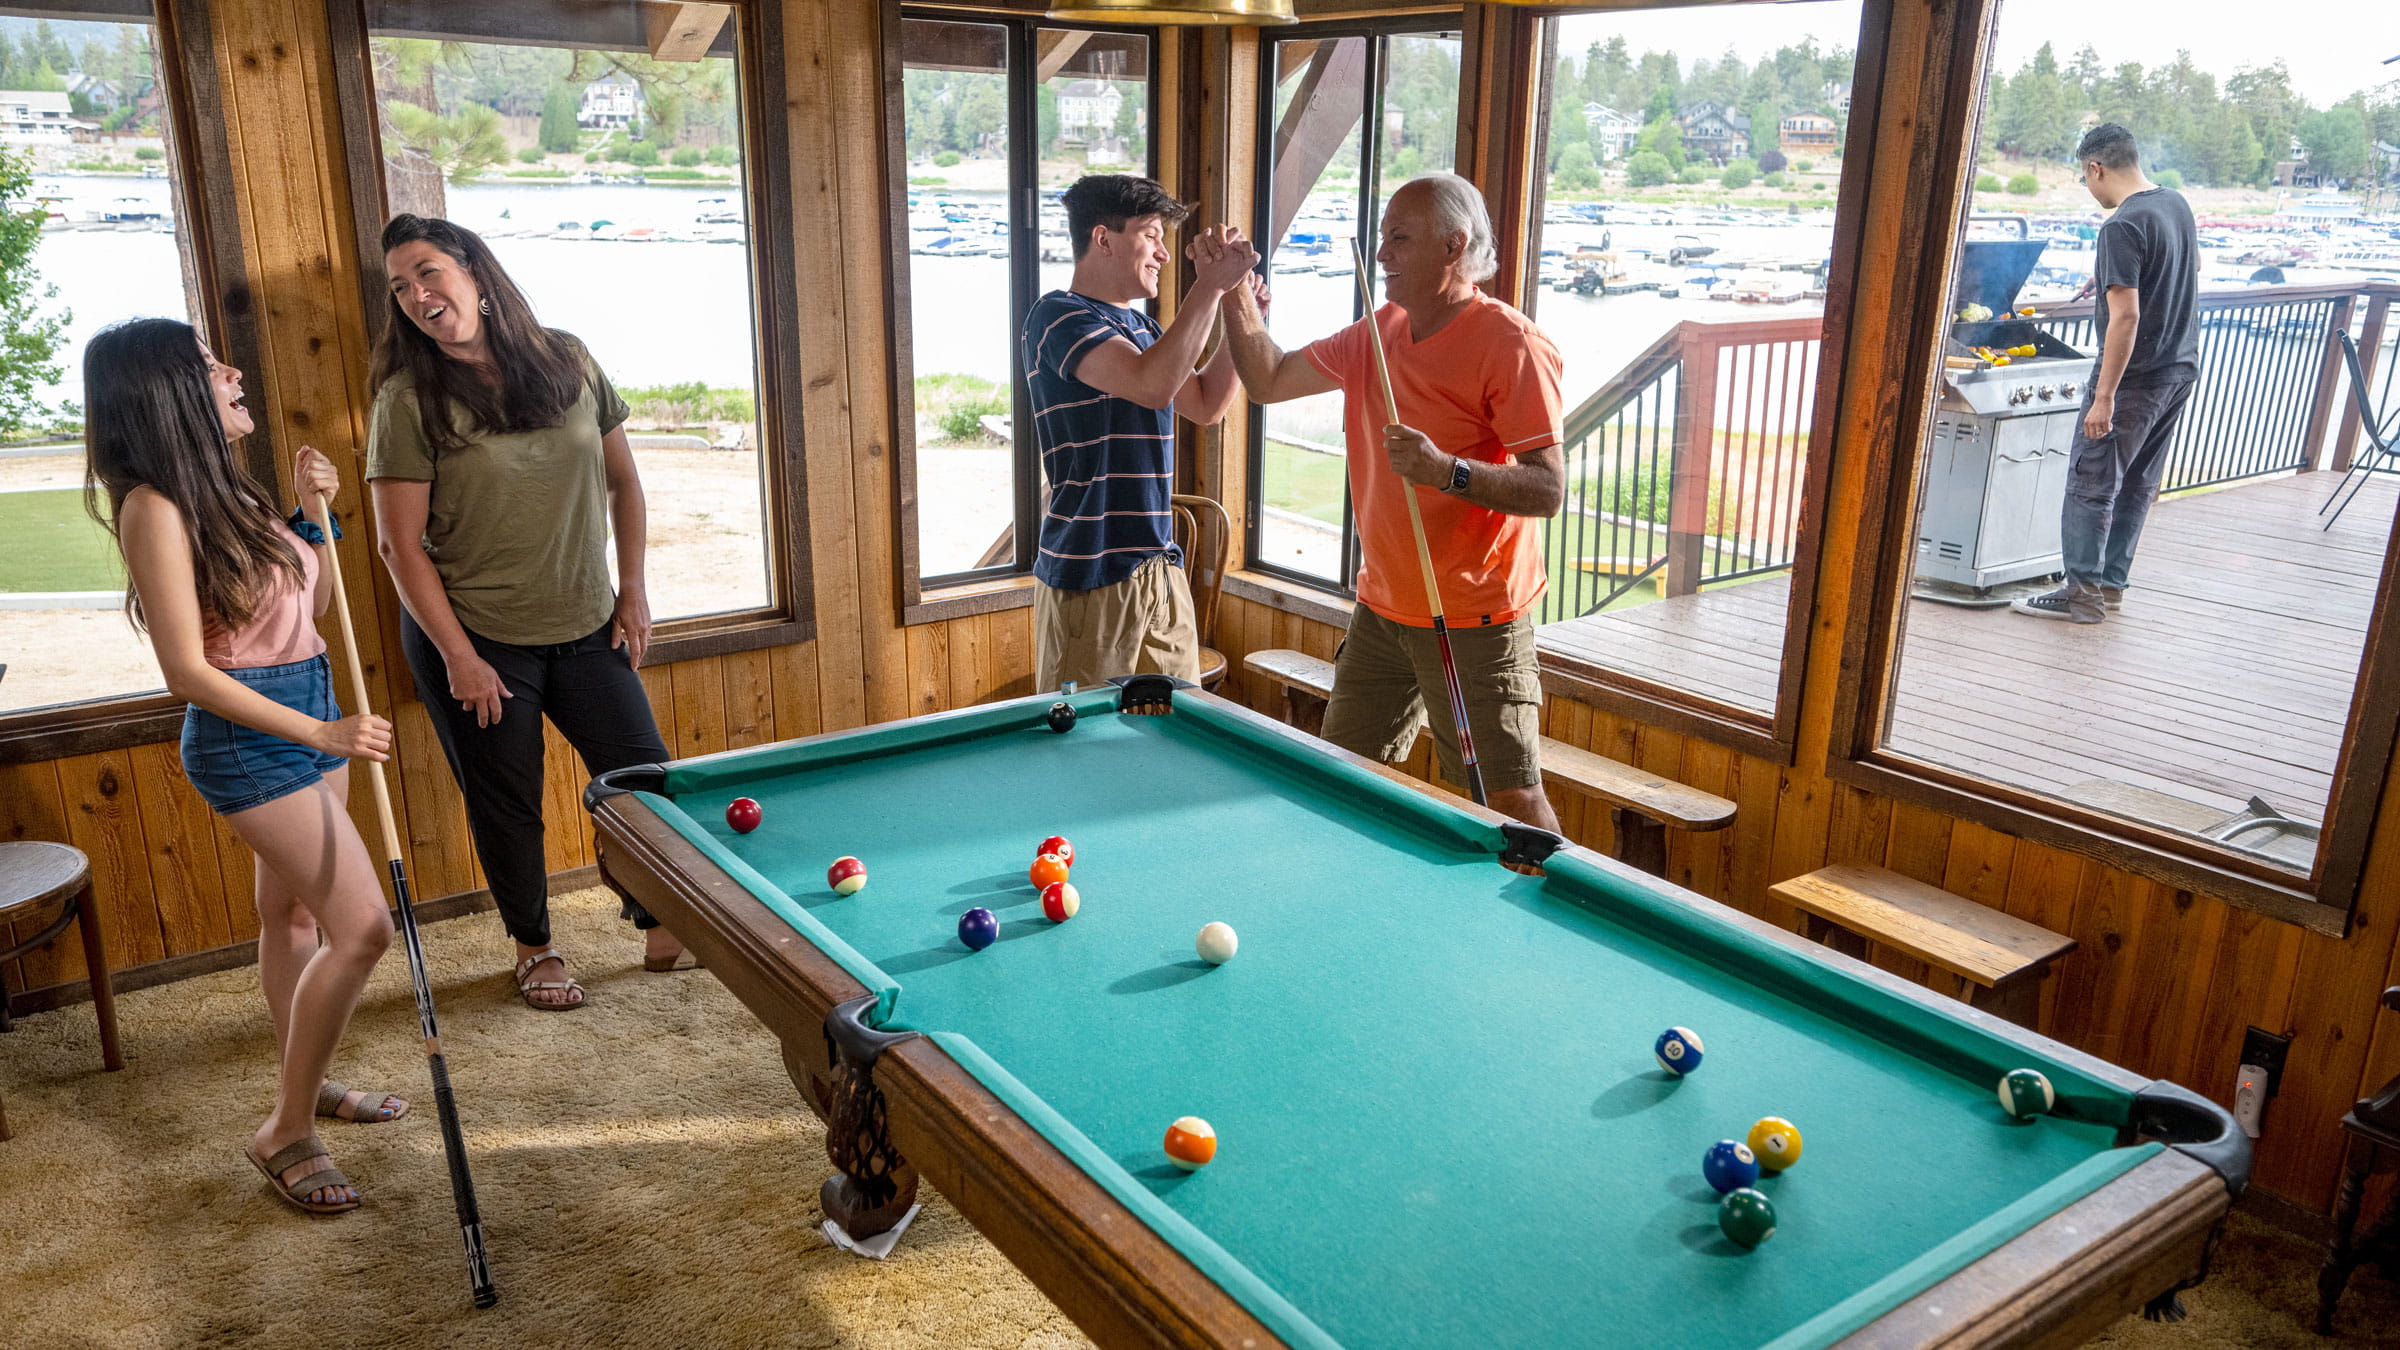 People standing around a pool table